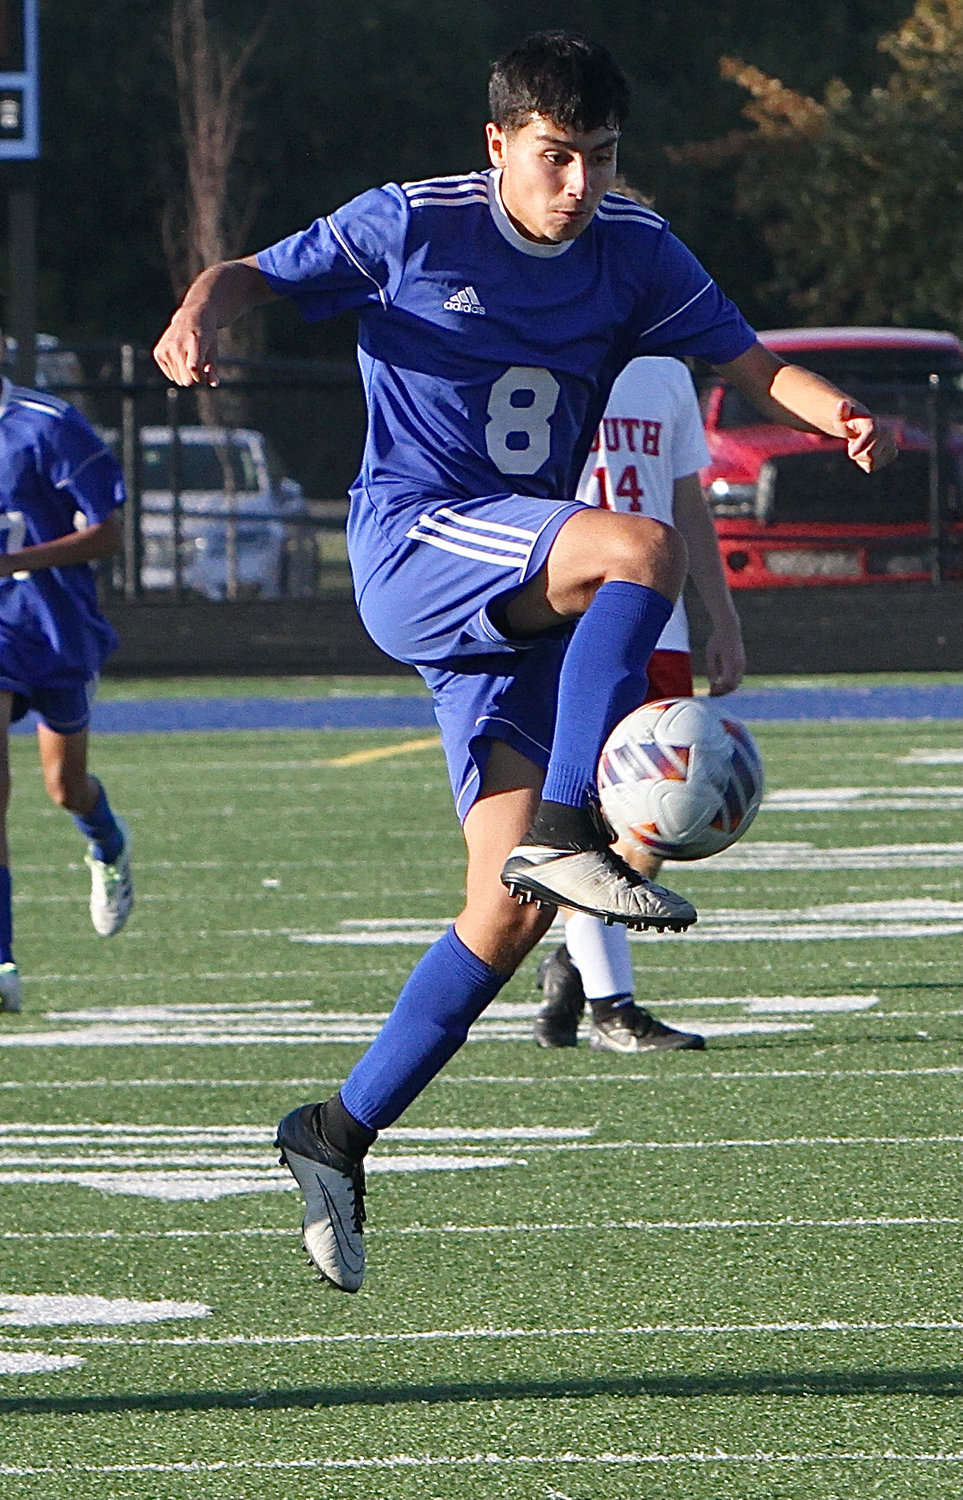 Manuel Olvera also had a two goals in the Crawfordsville win.